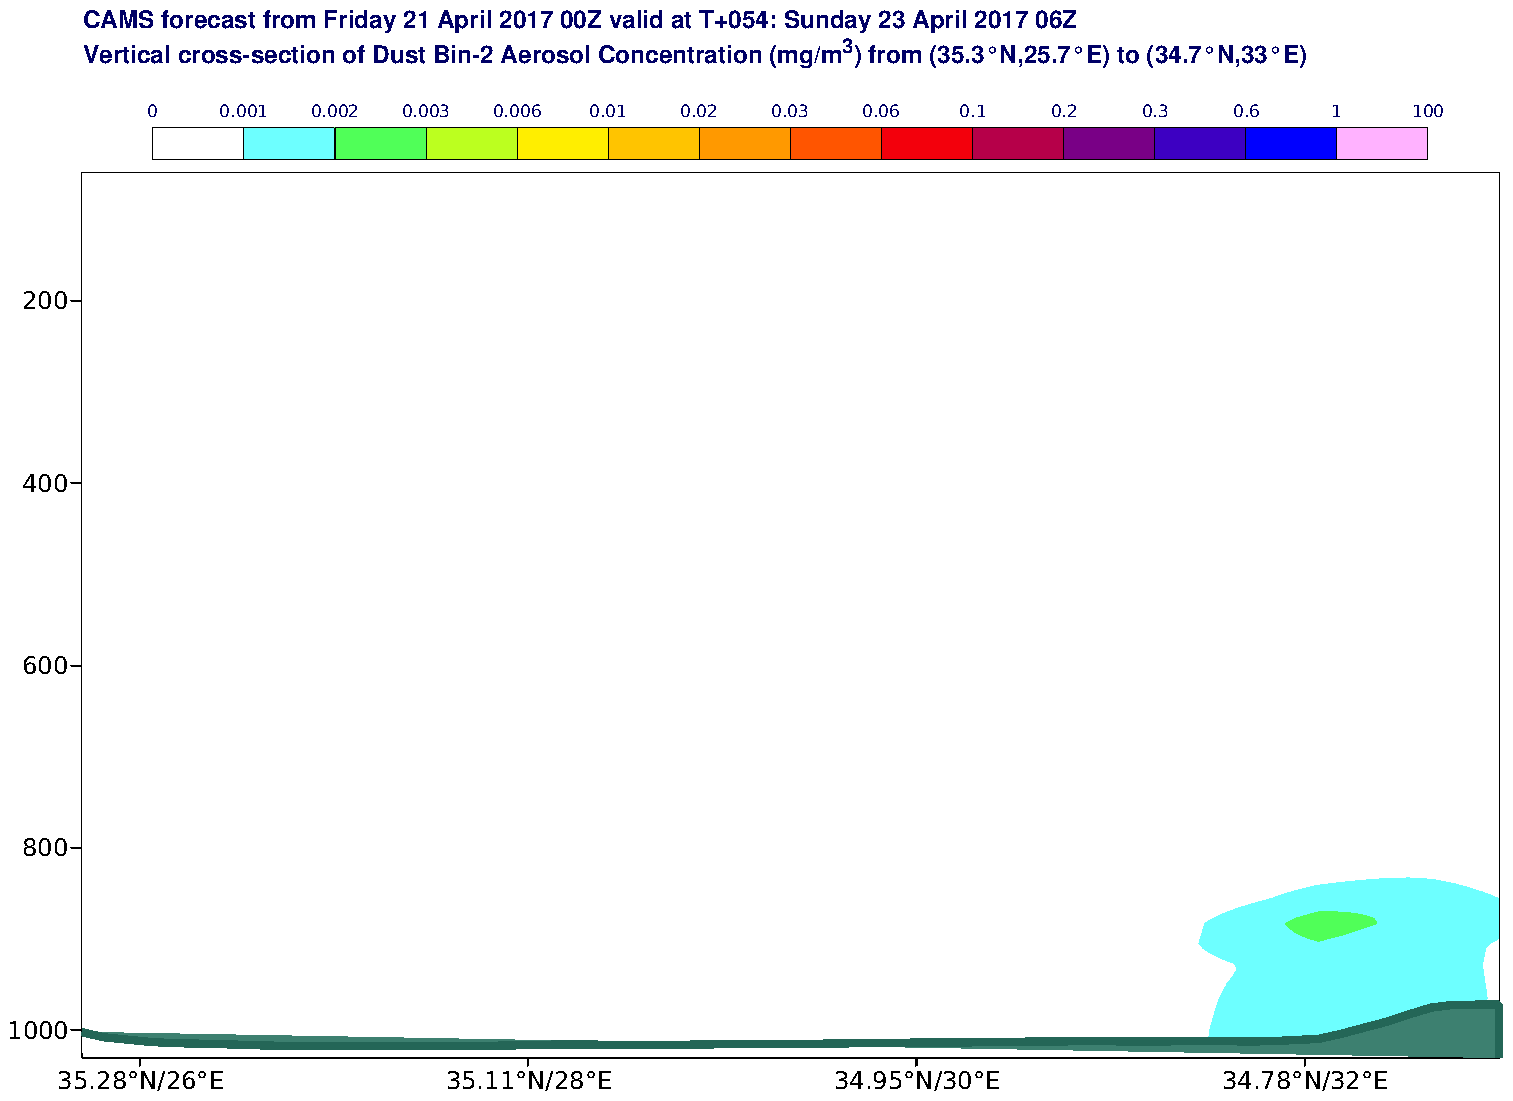 Vertical cross-section of Dust Bin-2 Aerosol Concentration (mg/m3) valid at T54 - 2017-04-23 06:00